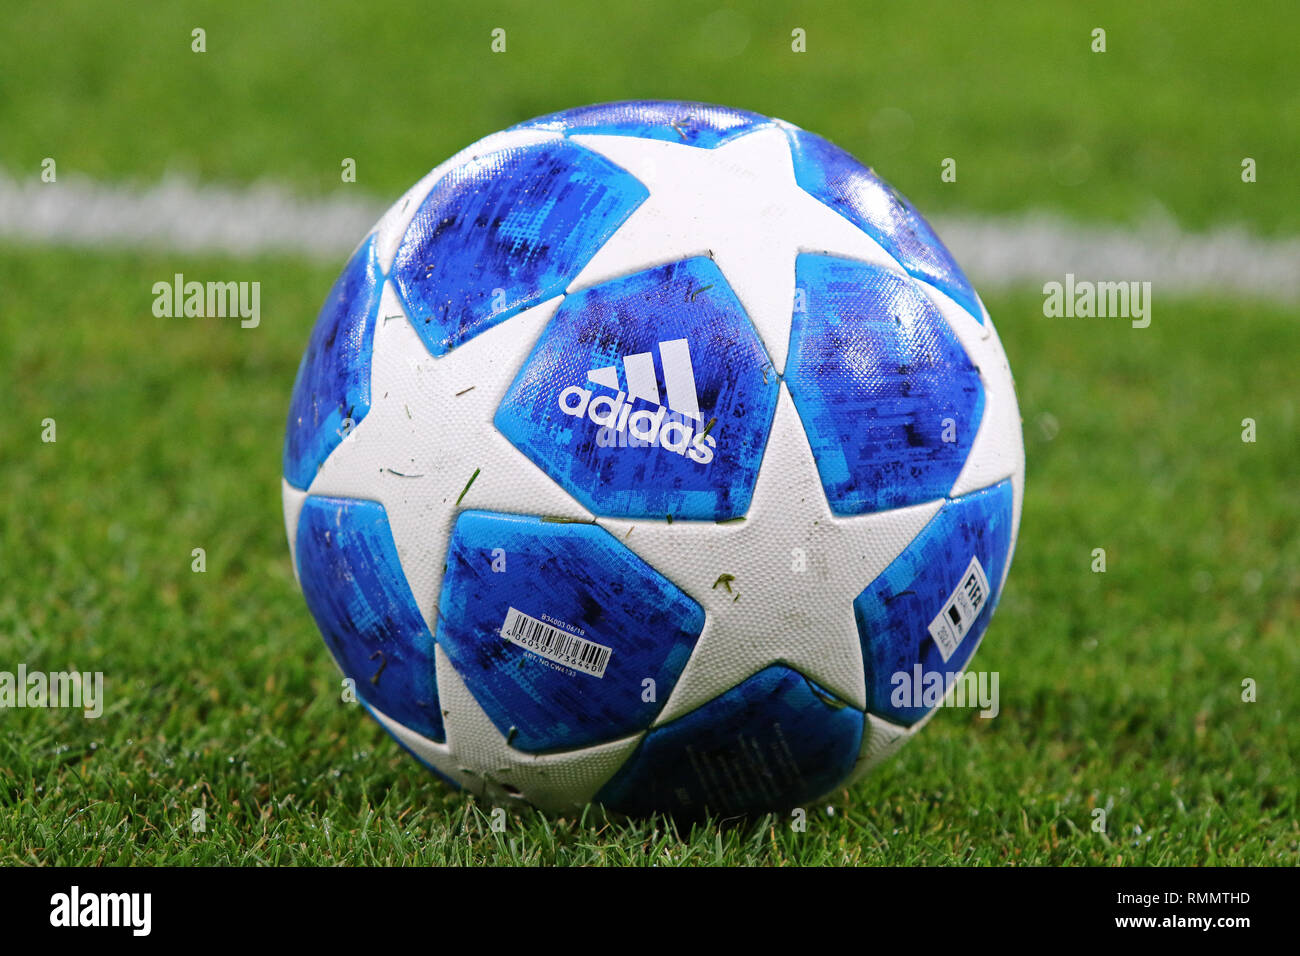 Kyiv Ukraine August 28 18 Official Uefa Champions League 18 19 Season Match Ball On The Grass During The Uefa Champions League Play Off Game Stock Photo Alamy